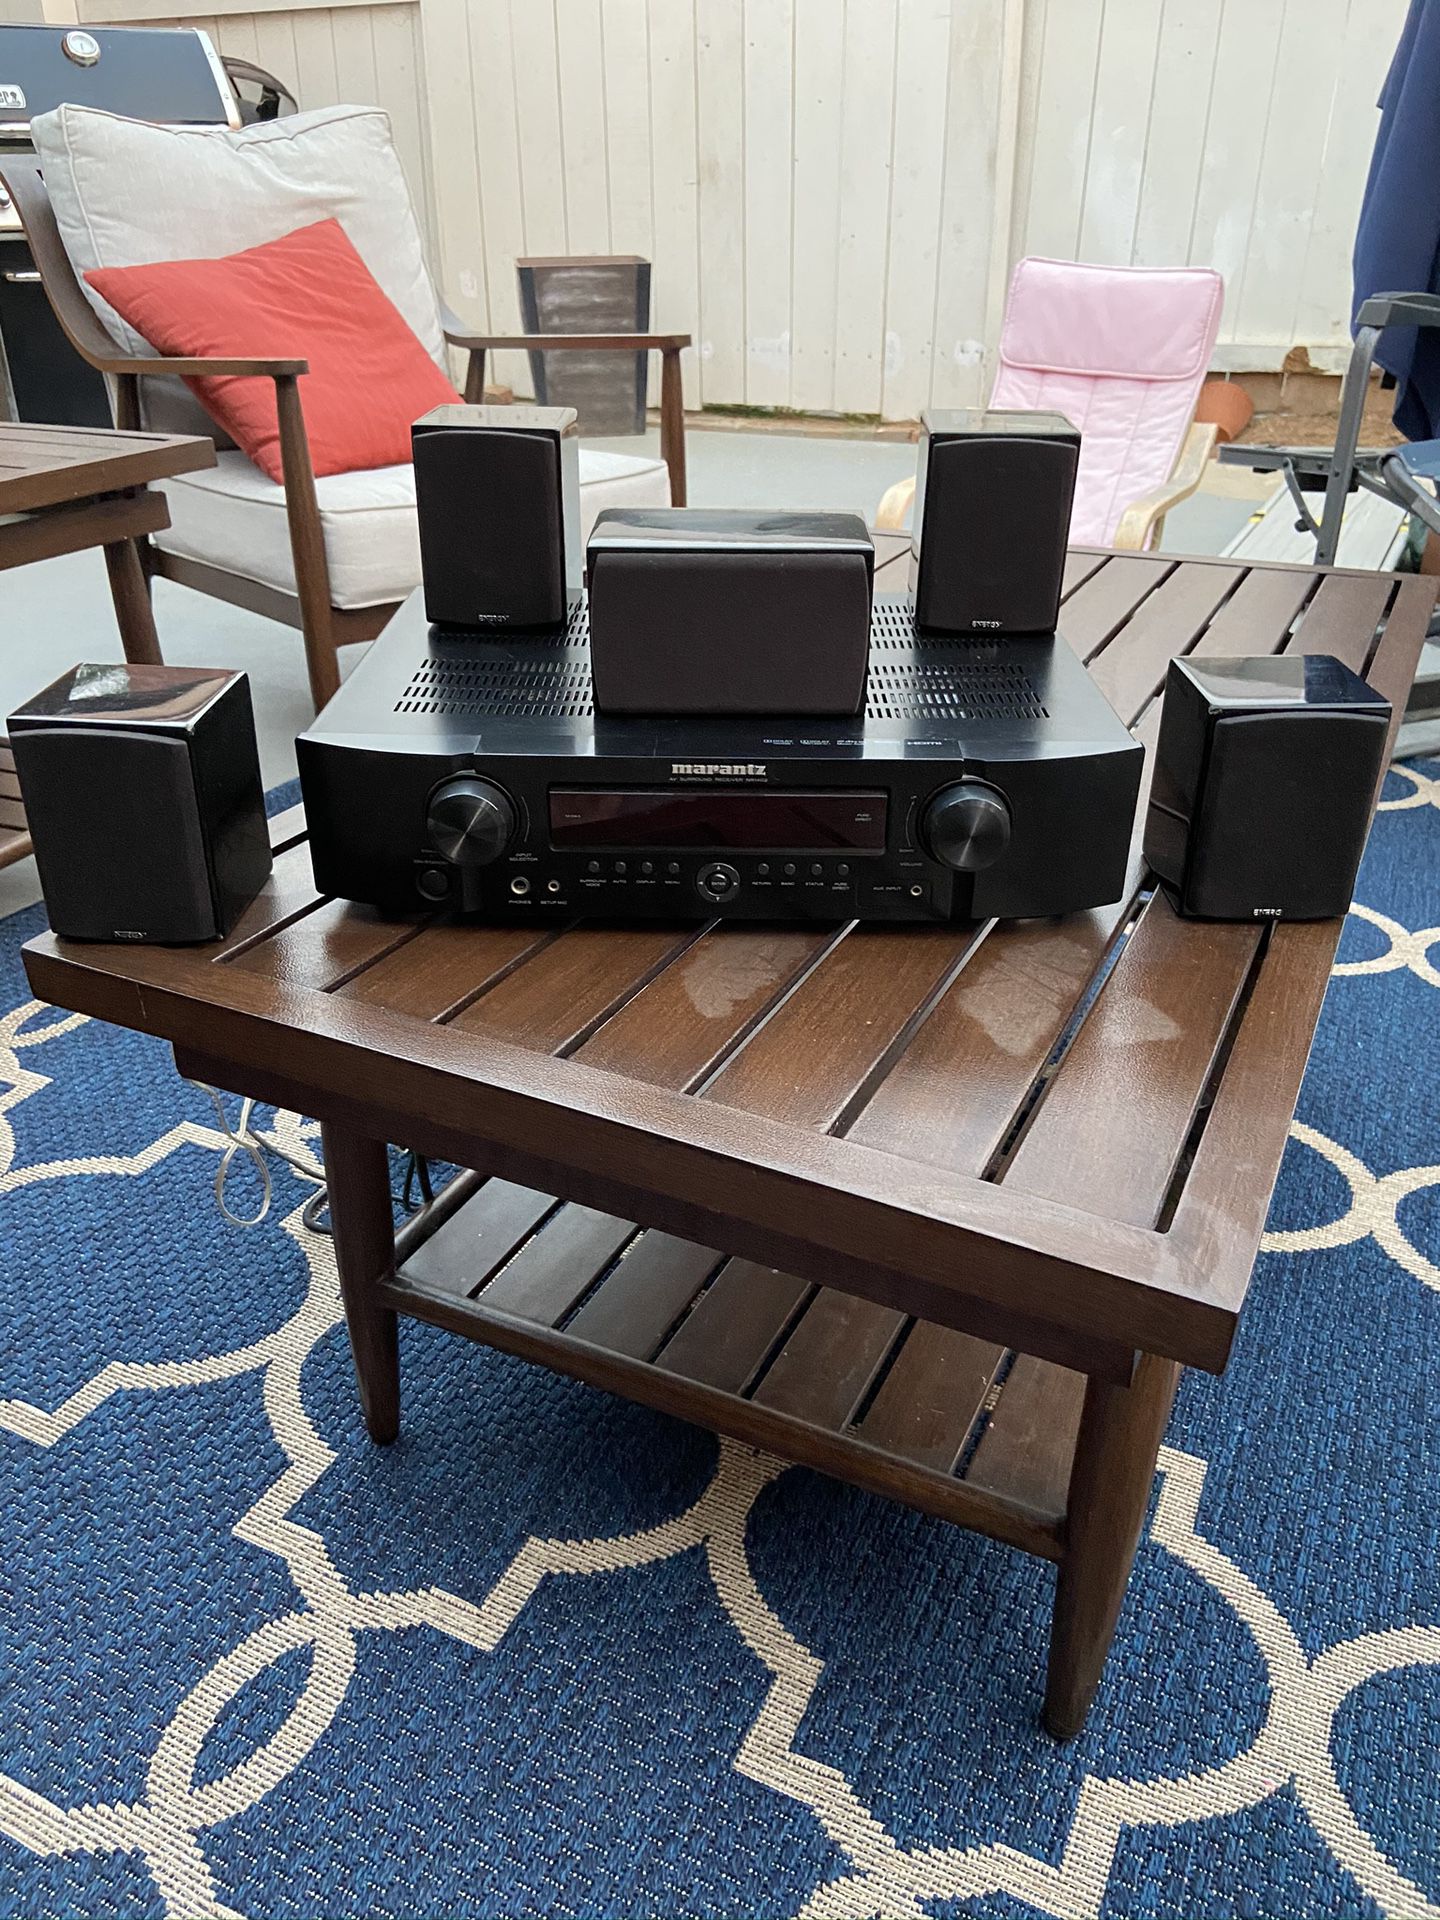 For sale marantz small footprint receiver 5.1 and energy micro surround system with subwoofer (5.1)